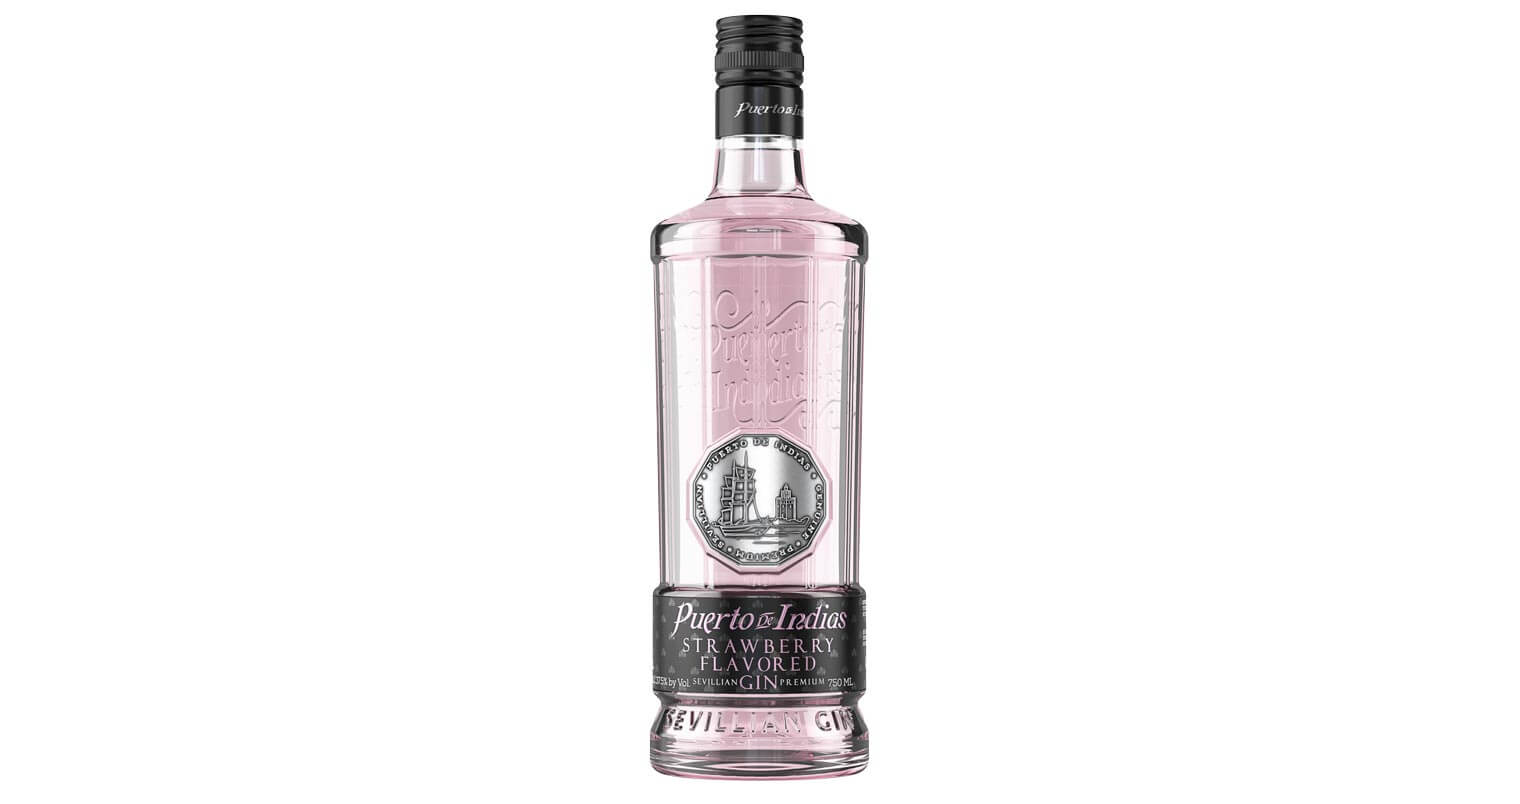 Puerto de Indias Strawberry Gin, bottle on white, featured image